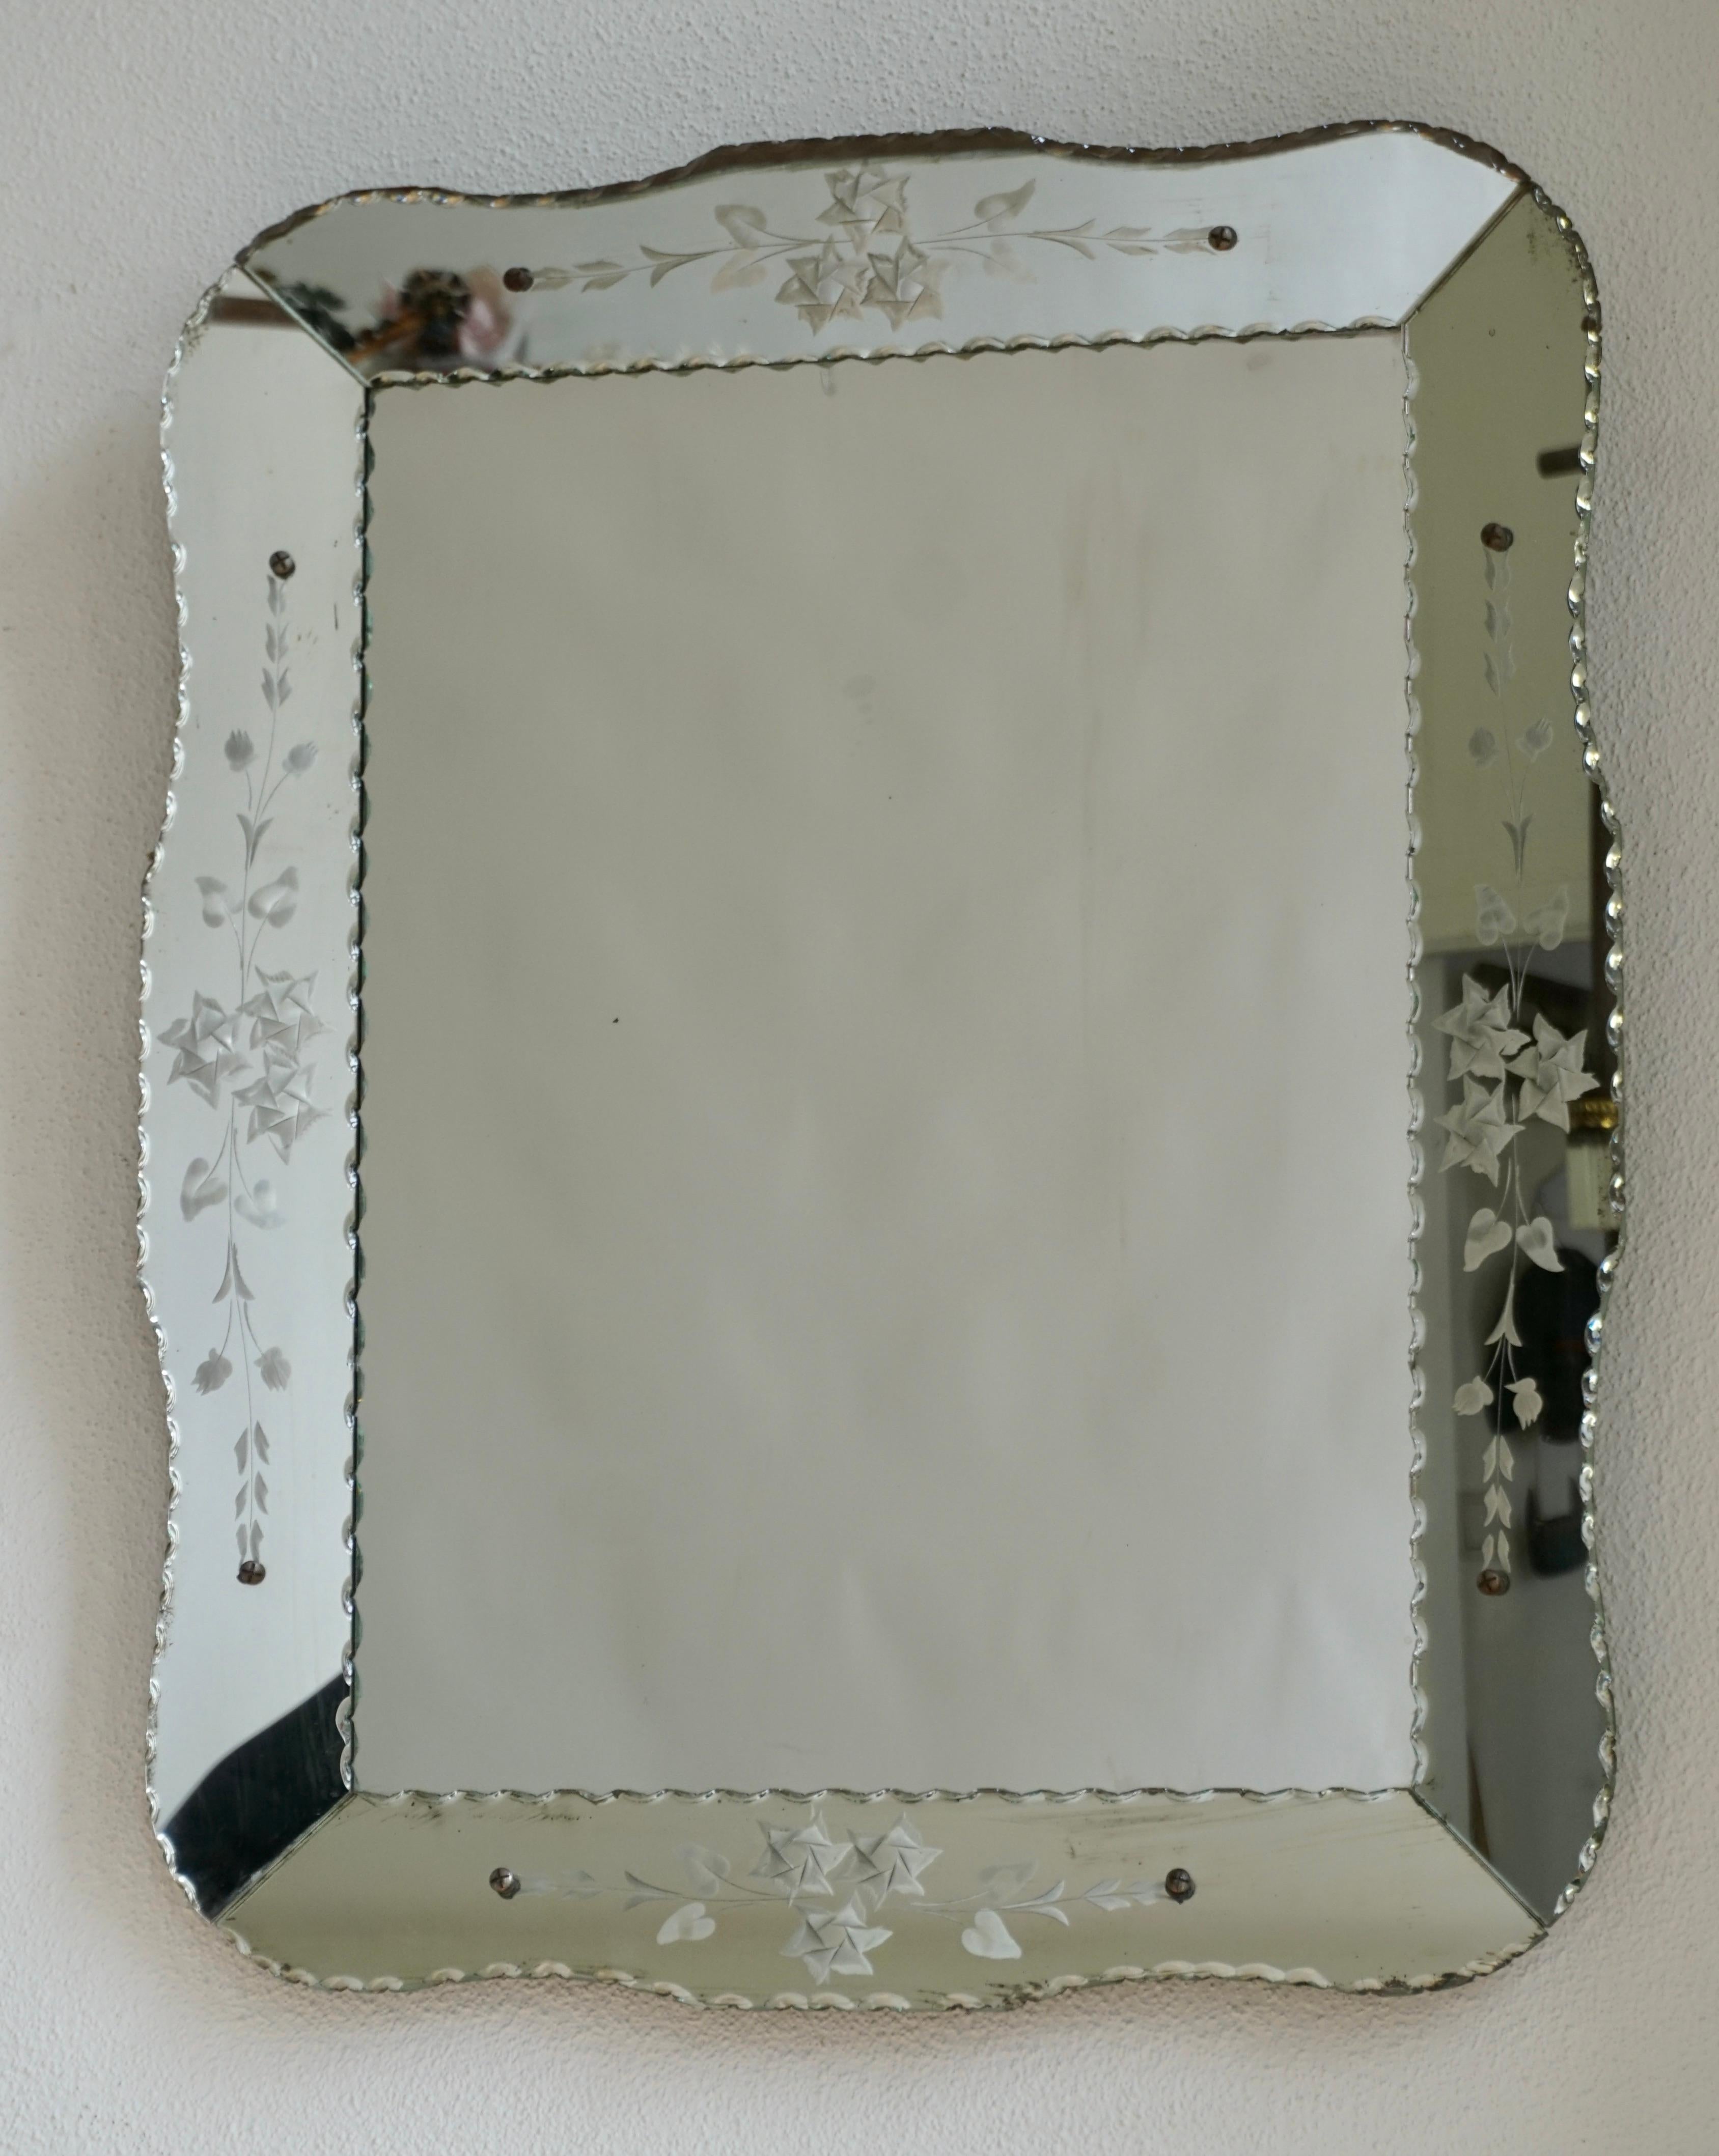 Vintage etched and beveled venetian mirror. 
This unusually shaped Venetian mirror has a beveled perimeter. Perfect mirror for a powder room or dressing room.